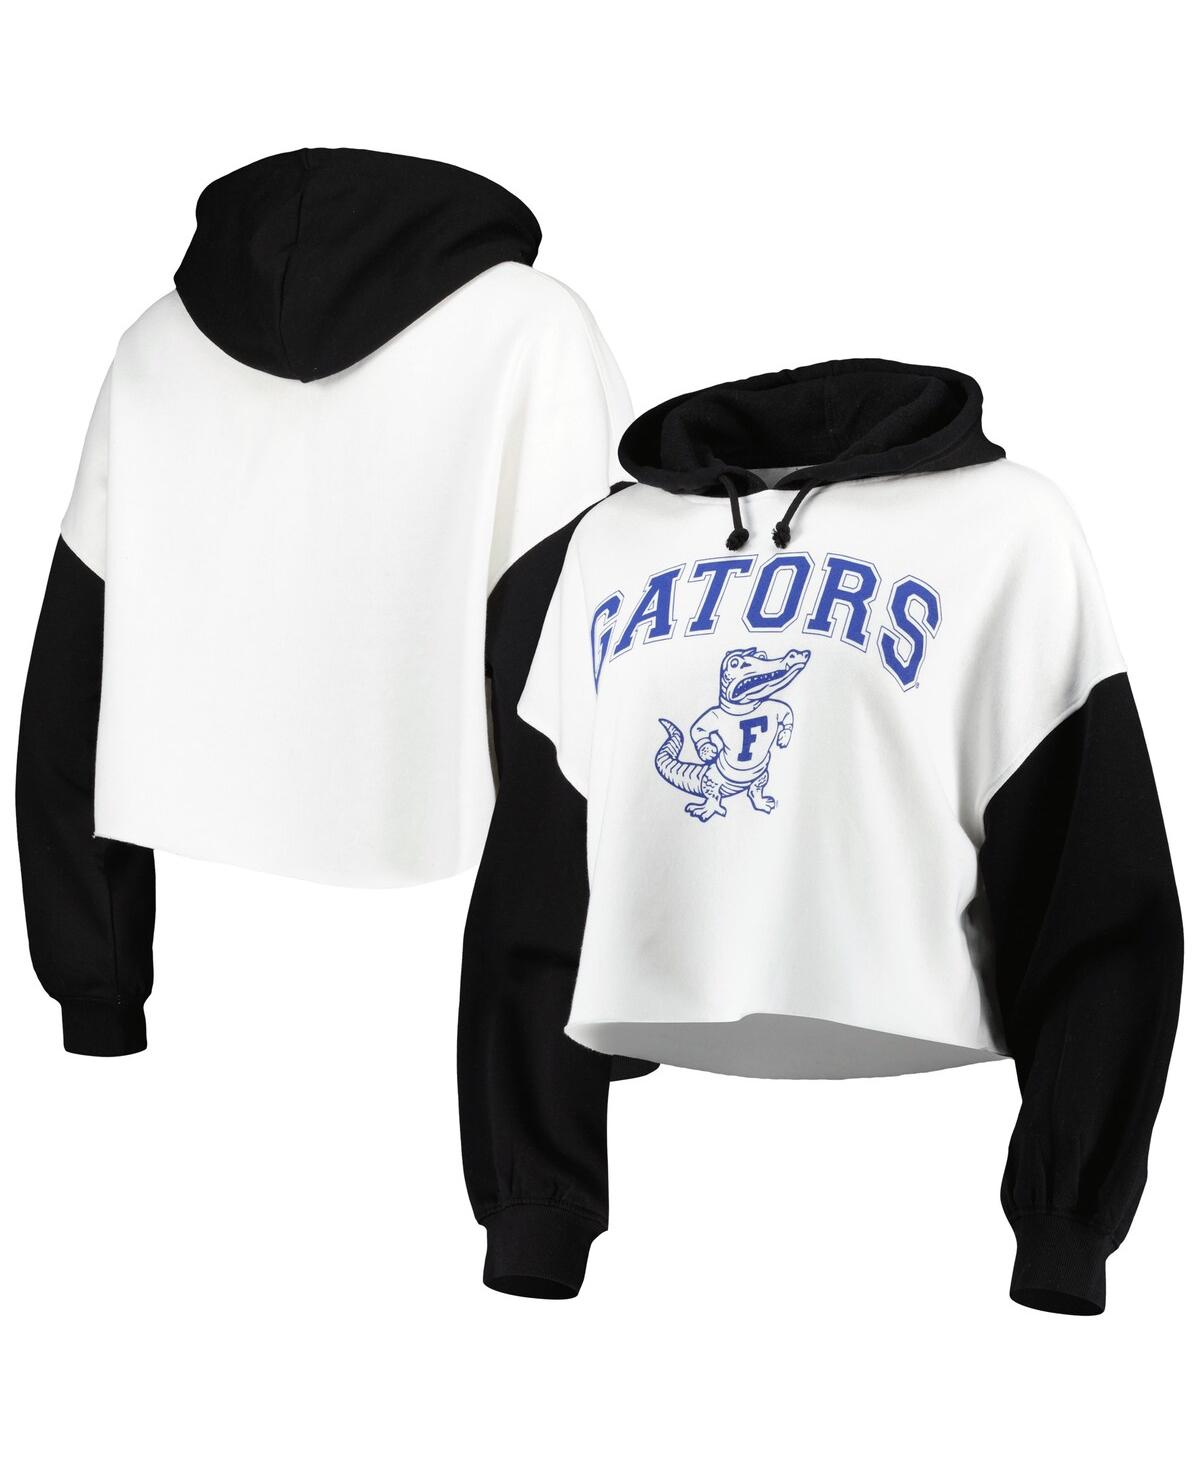 GAMEDAY COUTURE WOMEN'S GAMEDAY COUTURE WHITE, BLACK DISTRESSED FLORIDA GATORS GOOD TIME COLOR BLOCK CROPPED HOODIE